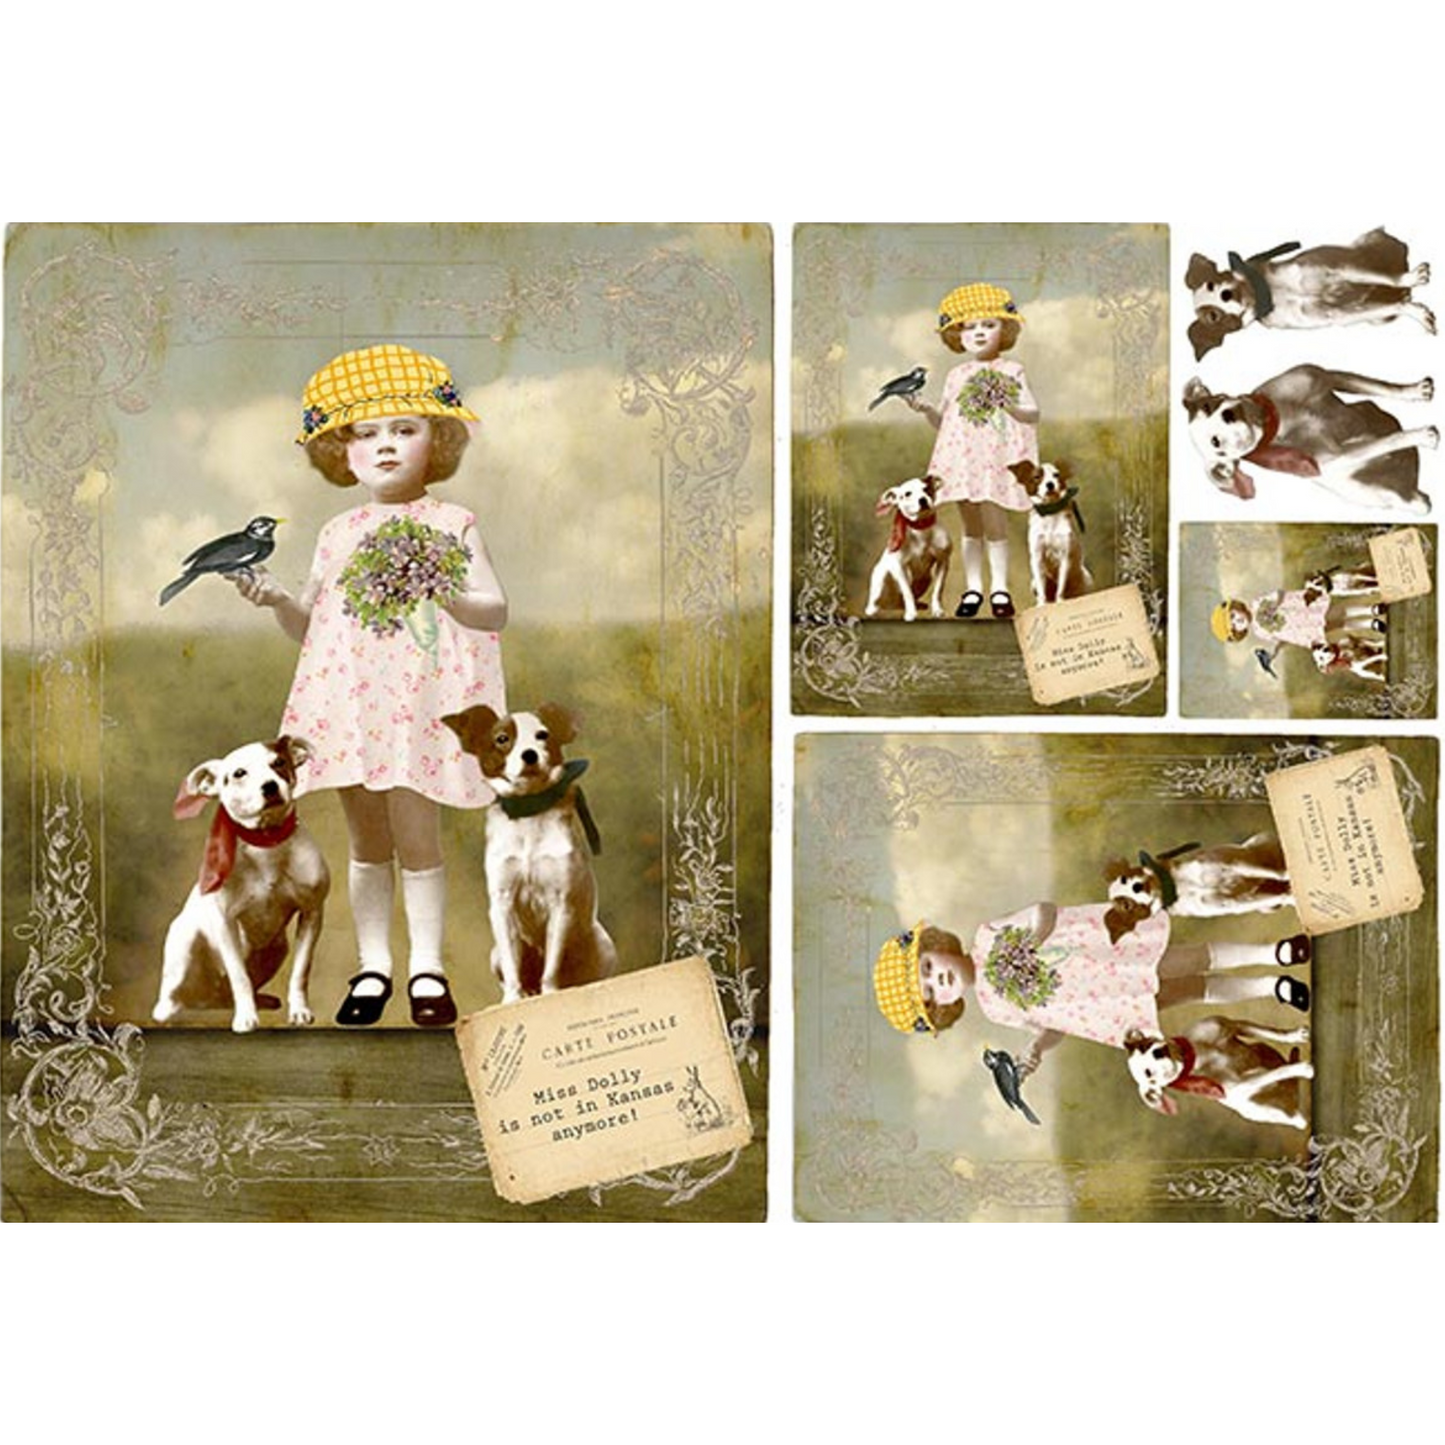 "Girl with her Puppies" decoupage rice paper by Paper Designs. Available at Milton's Daughter.